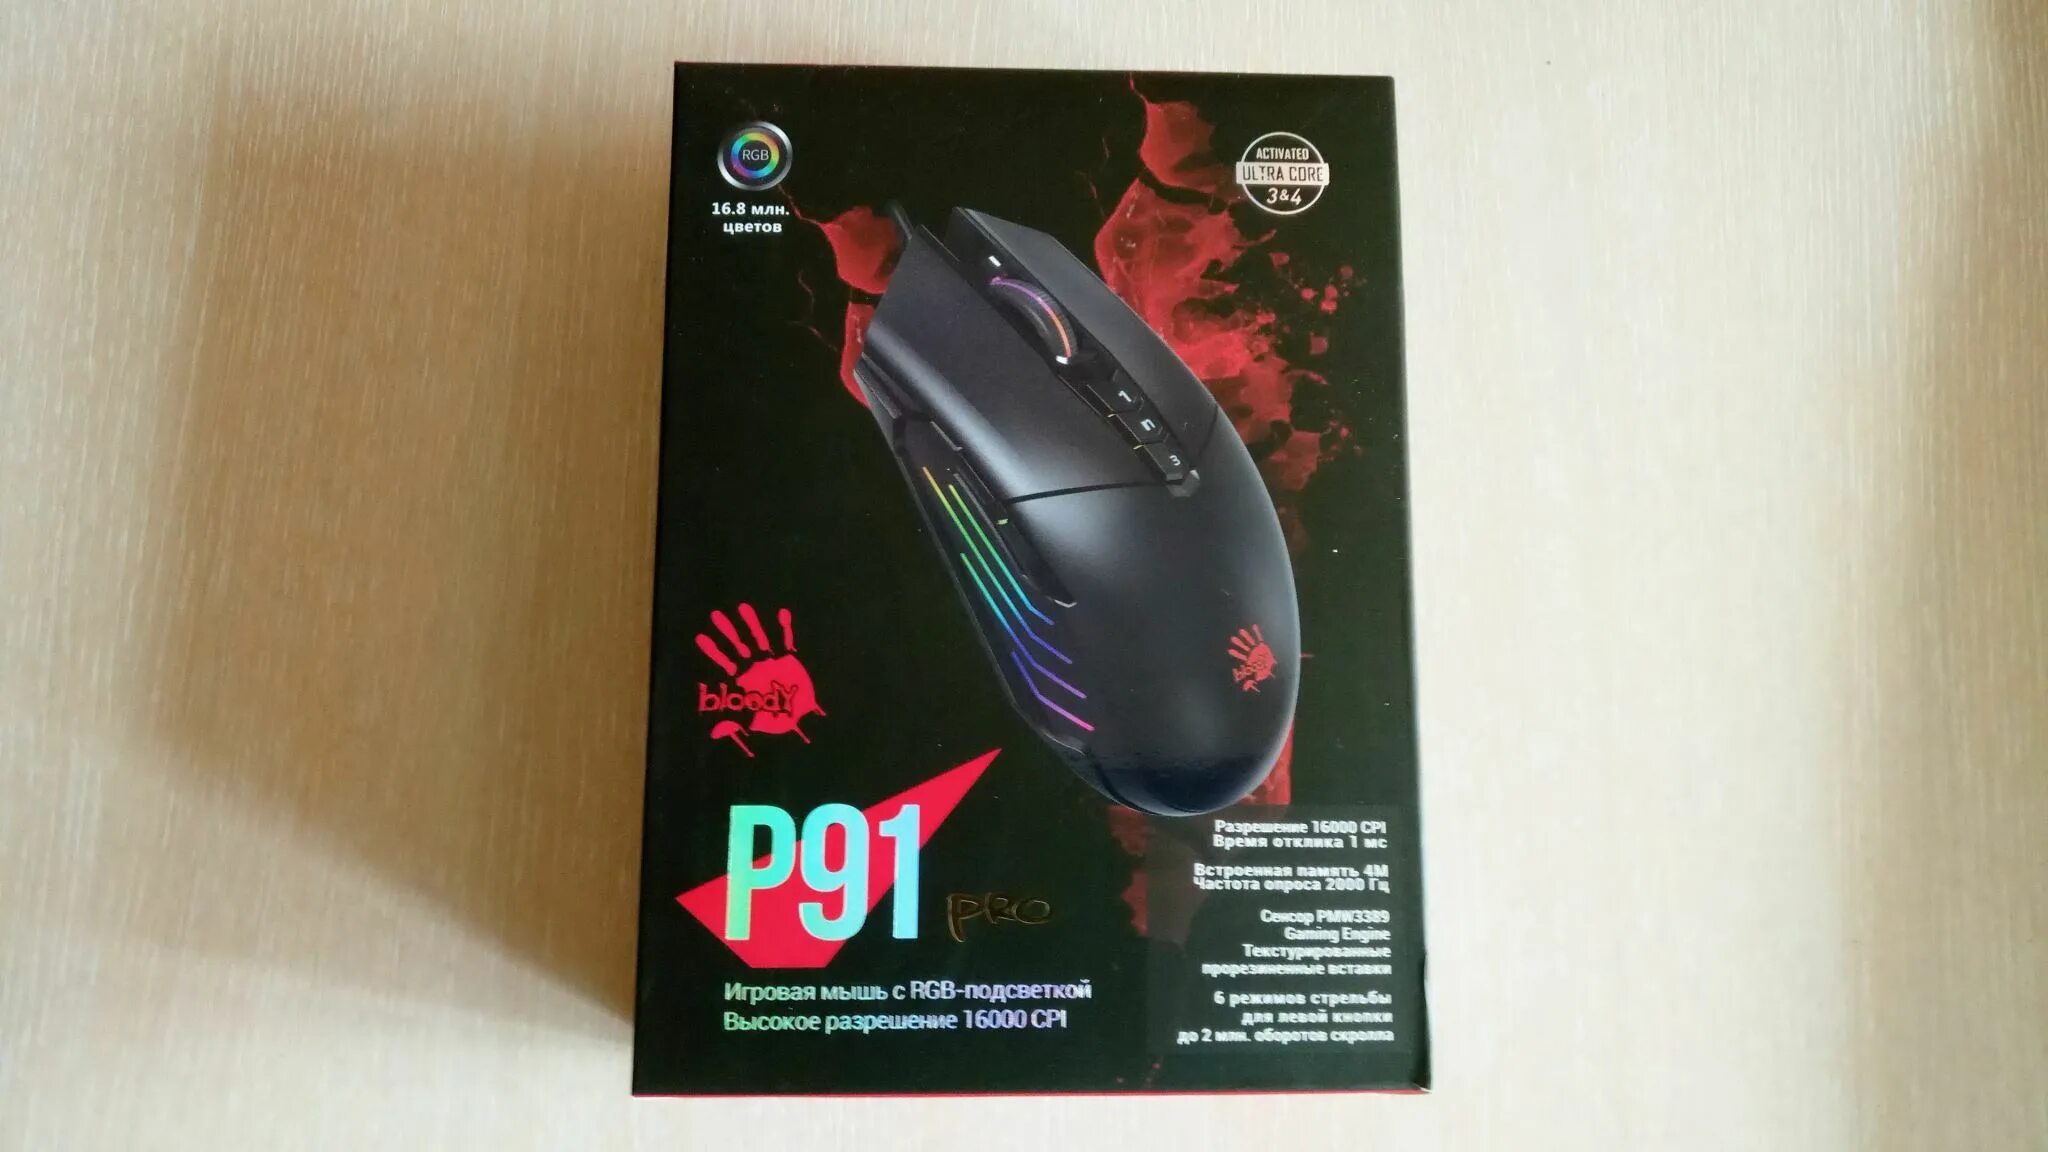 A4tech Bloody p91 Pro. Игровая мышь a4tech Bloody p91. Мышь игровая a4 Bloody p91 Pro. Игровая мышь Bloody a91 для Xbox. Blacklisted device bloody mouse